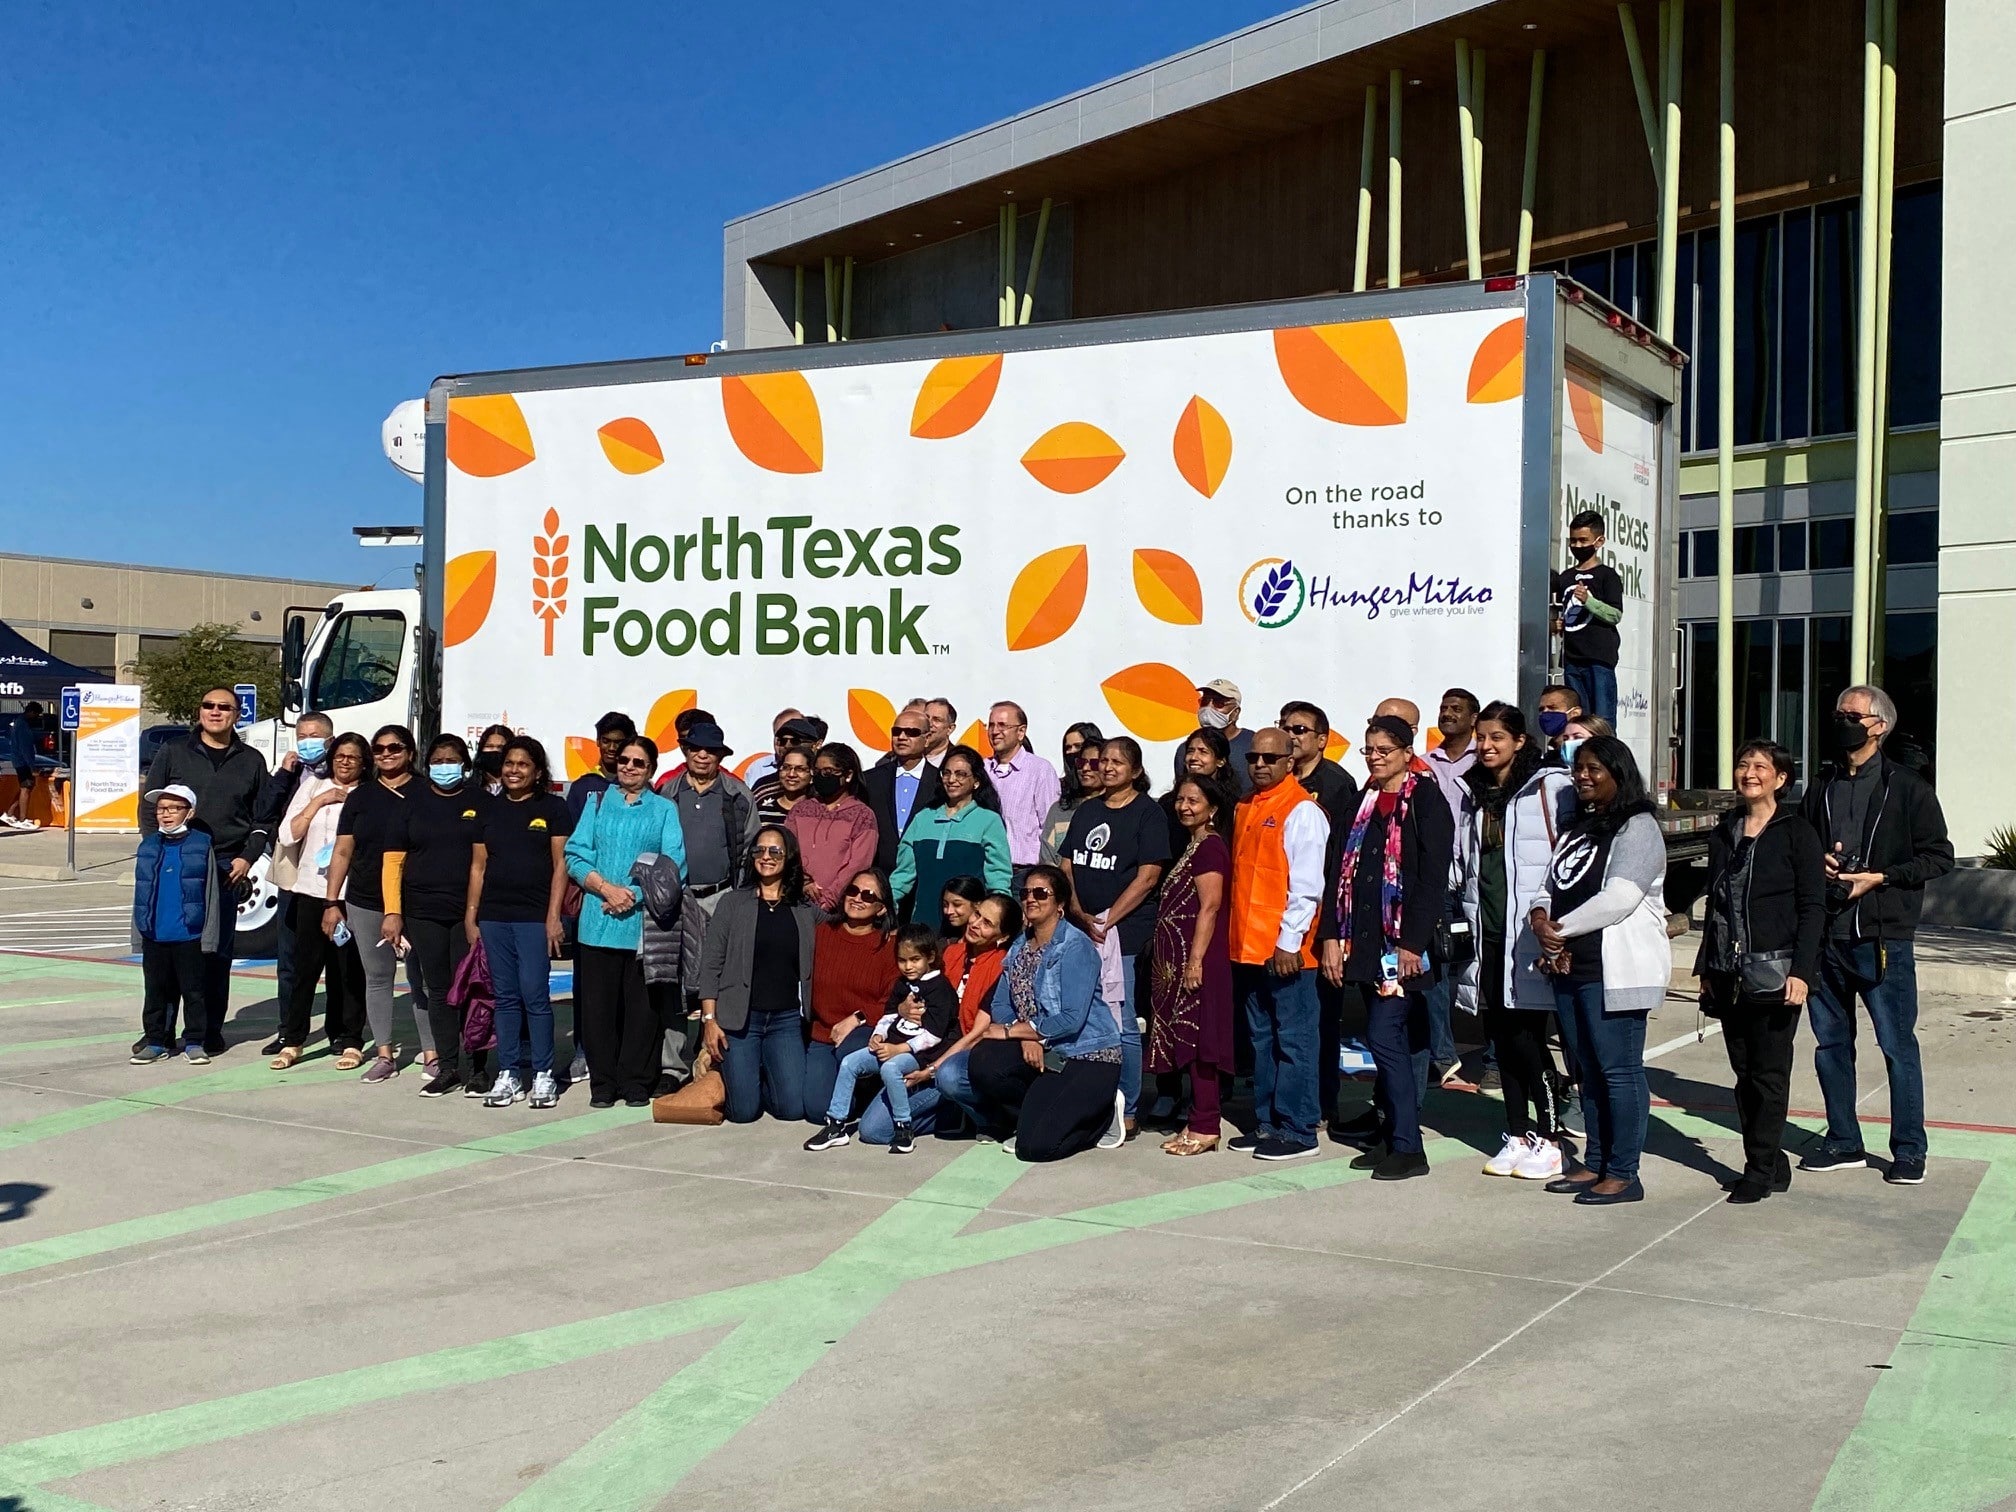 HungerMitao members standing in front of a North Texas Food Bank truck